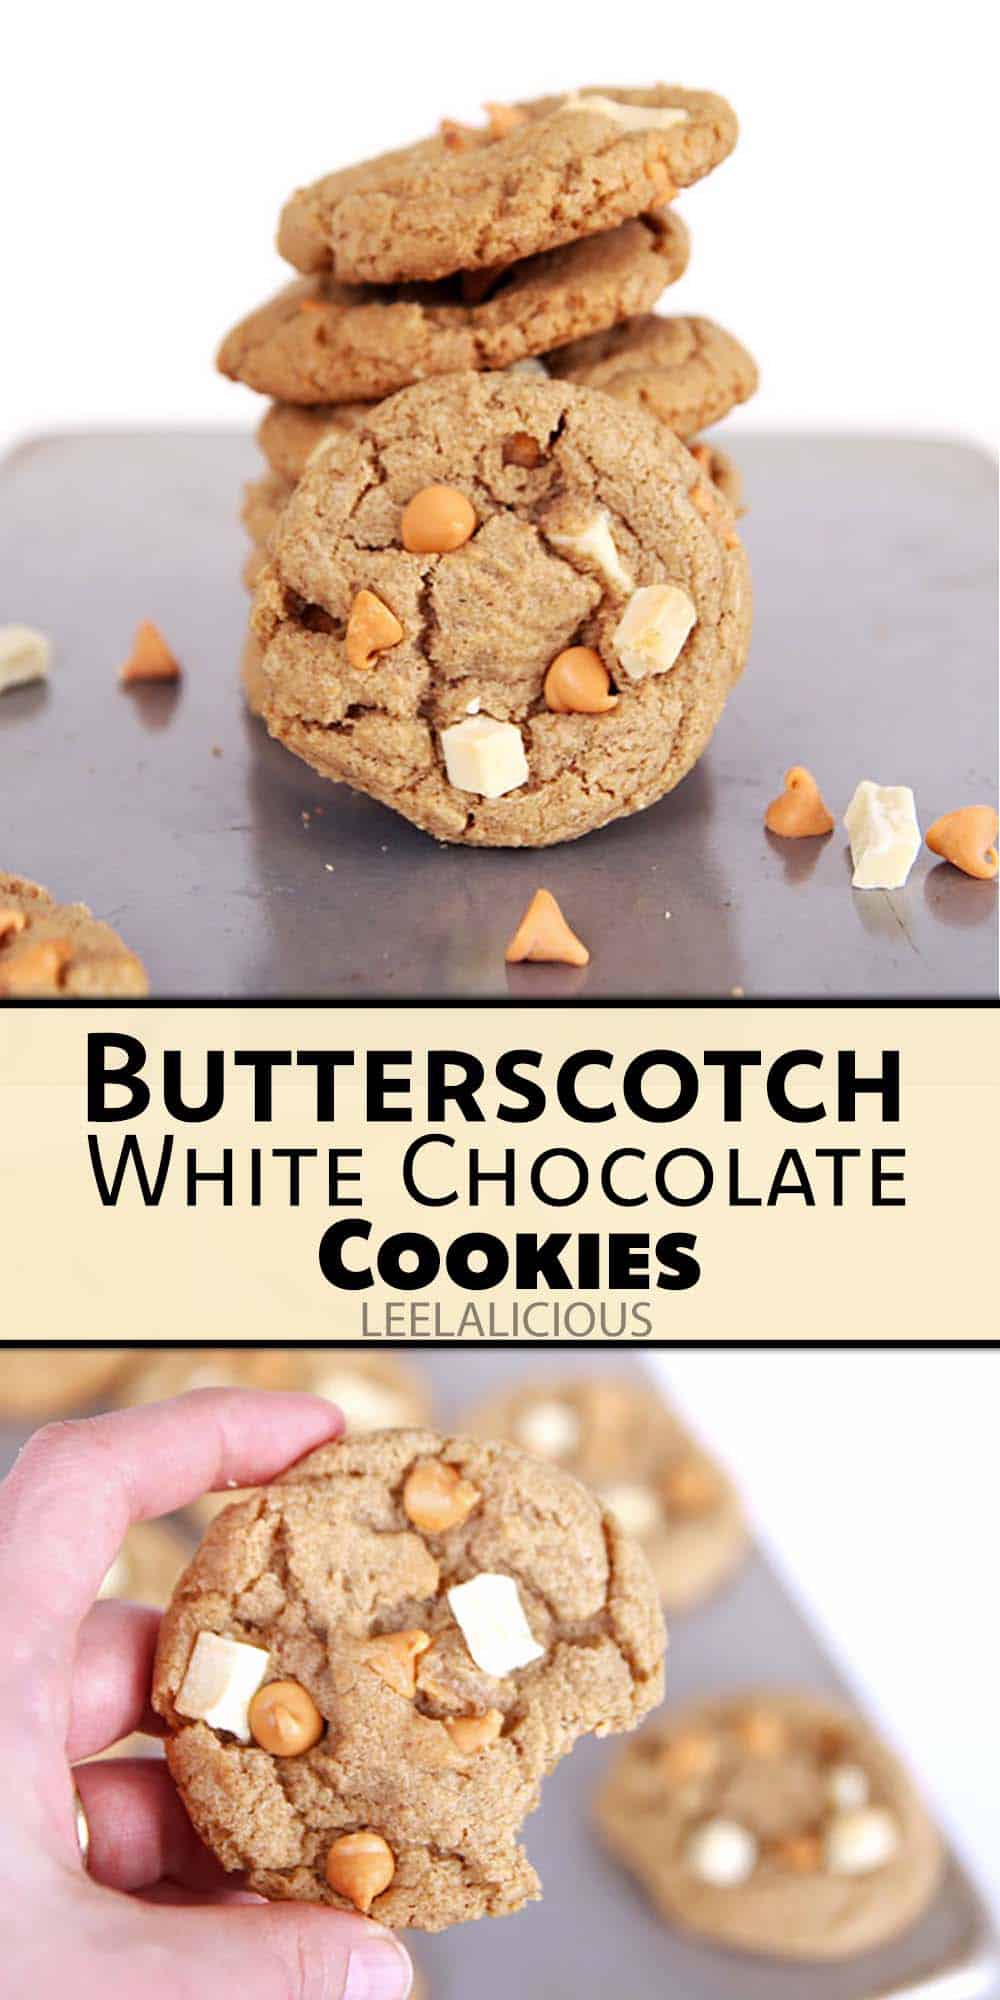 Butterscotch White Chocolate Cookies